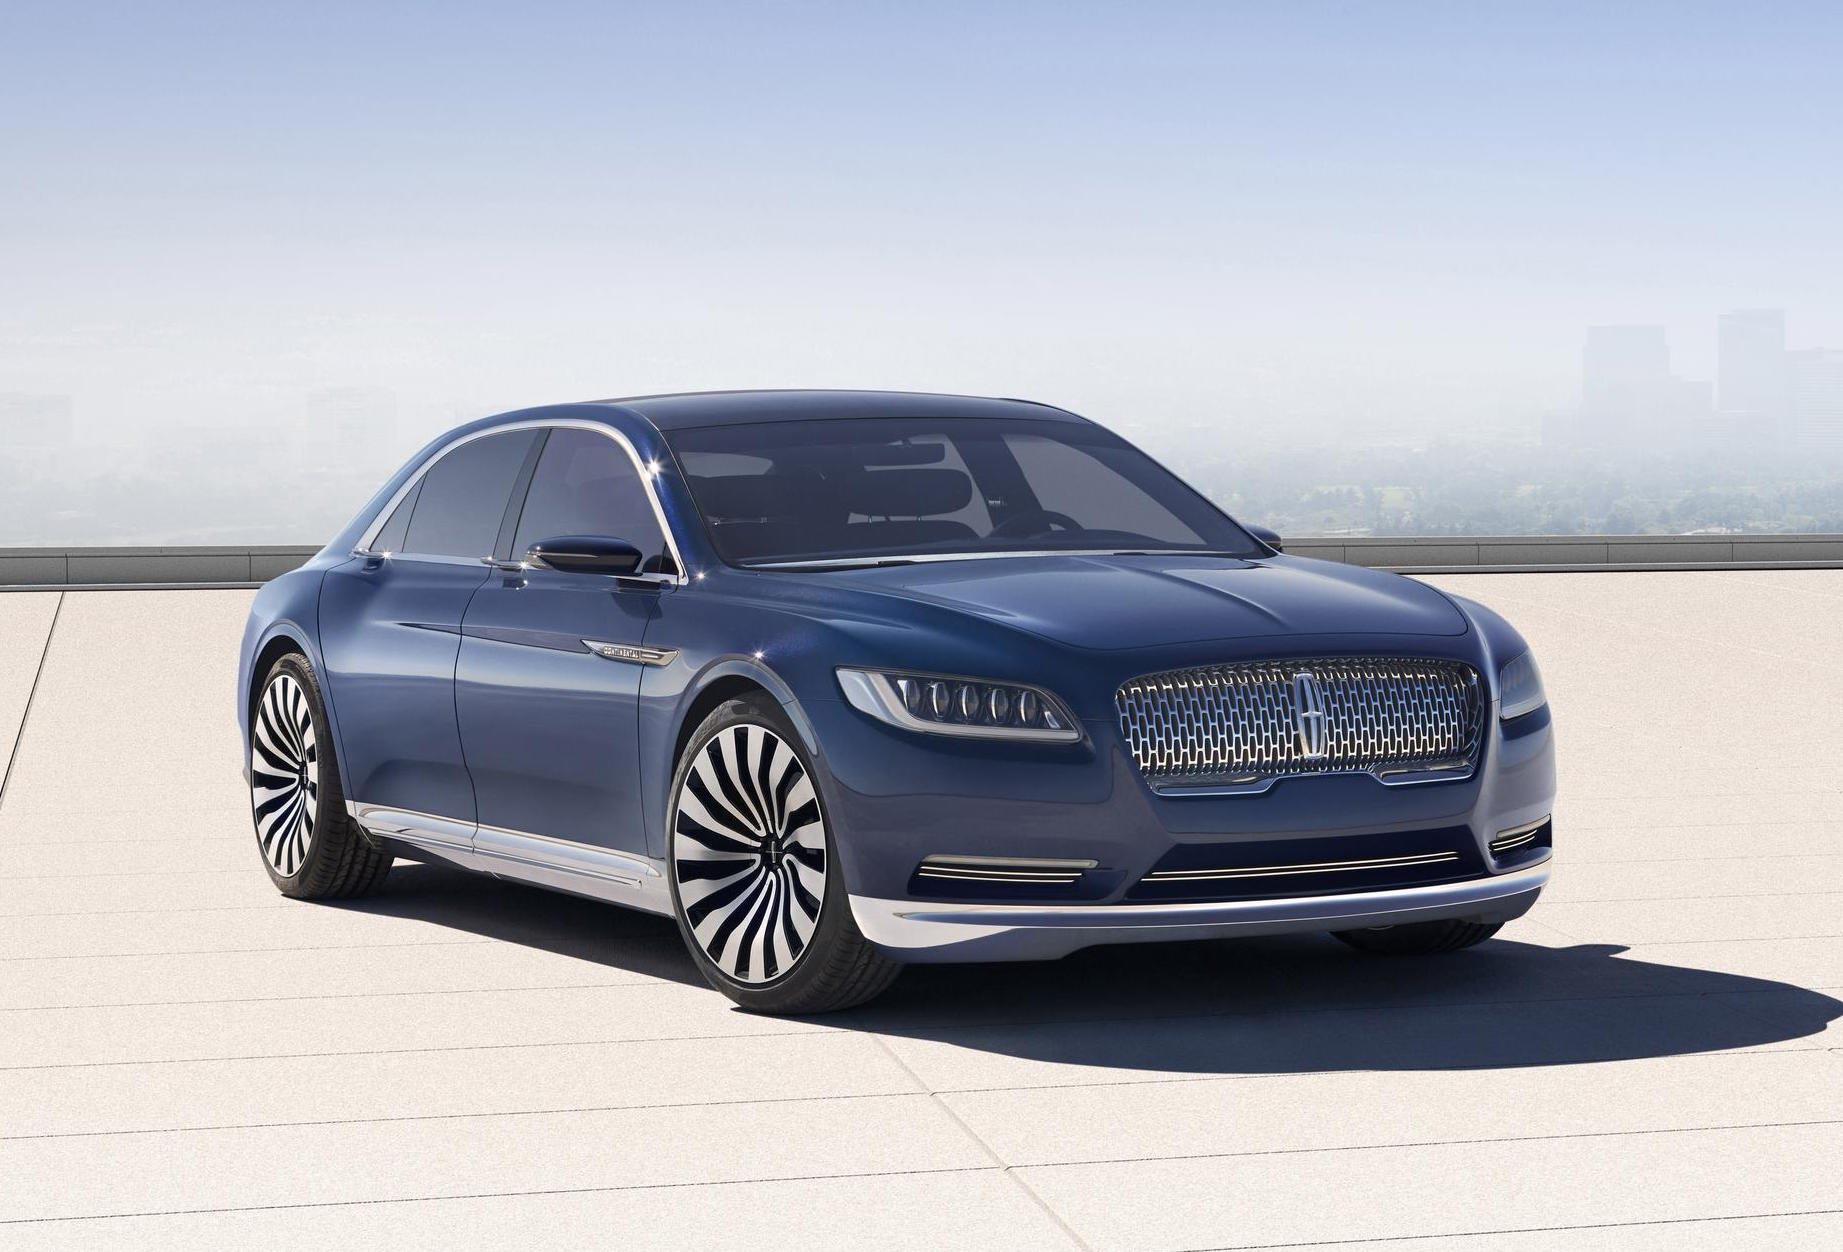 Lincoln Continental 2017 Wallpaper Image Photo Picture Background